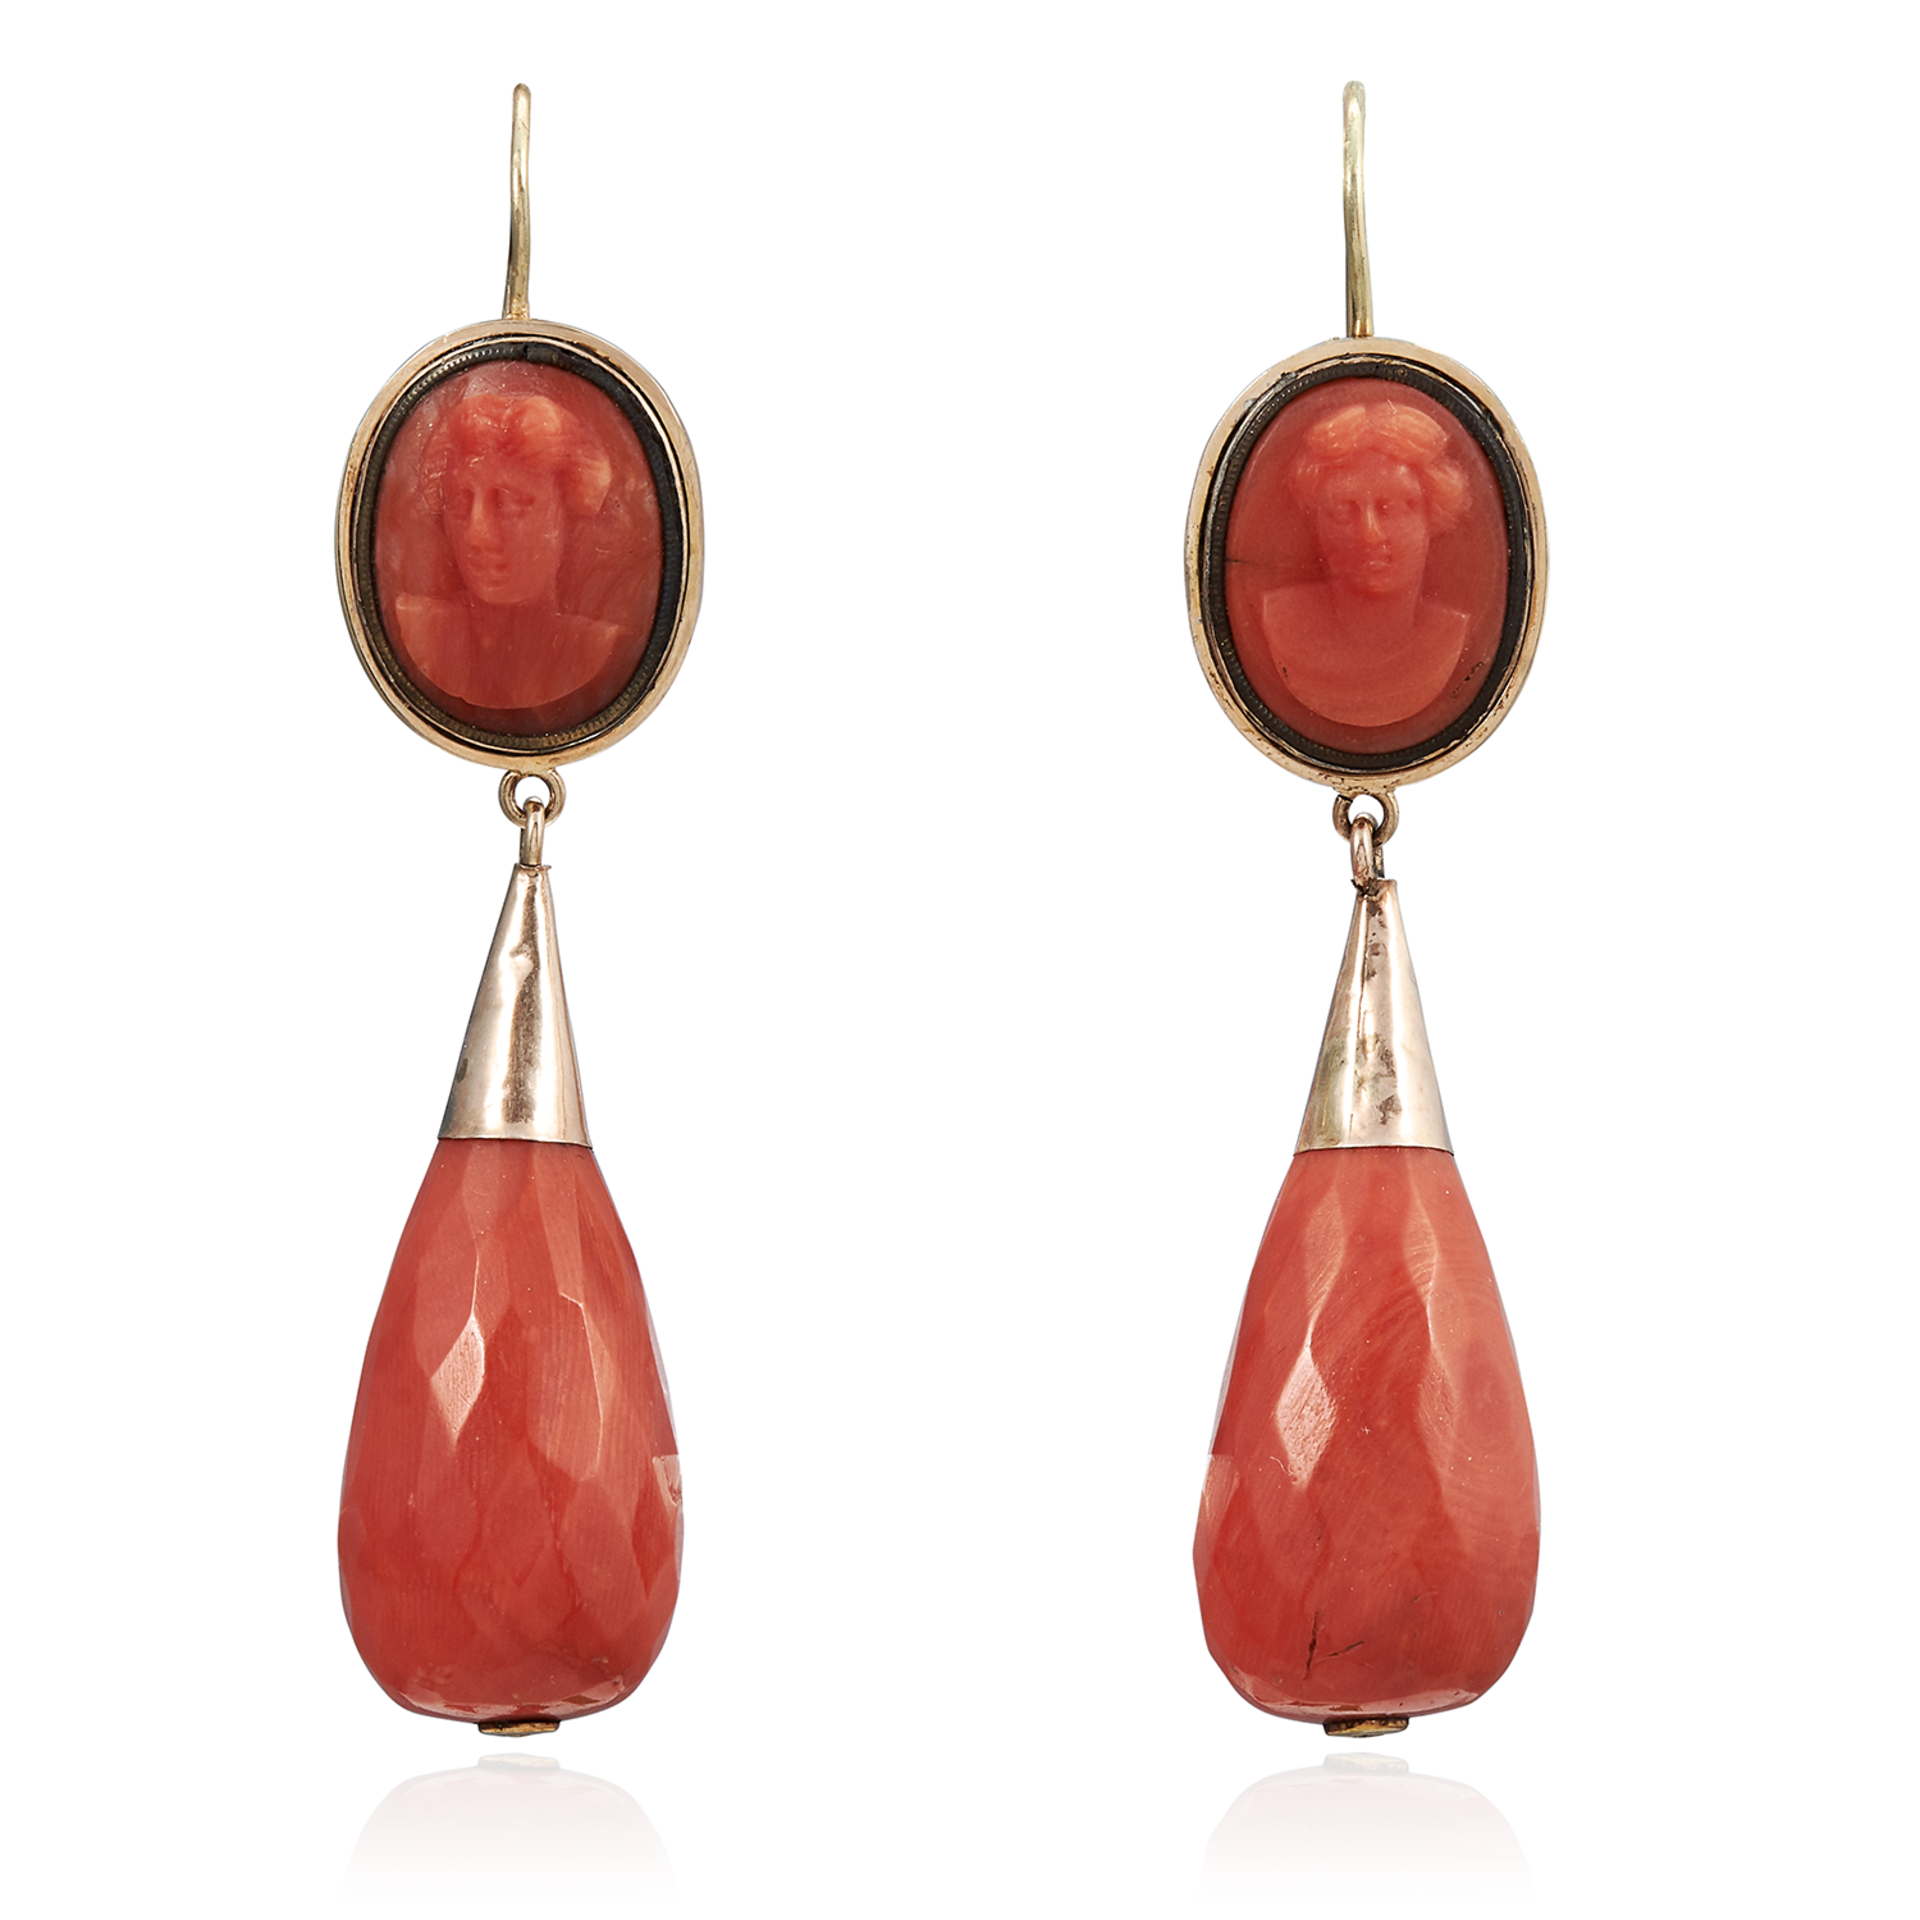 A PAIR OF ANTIQUE CORAL CAMEO DROP EARRINGS, EARLY 19TH CENTURY in high carat yellow gold, each